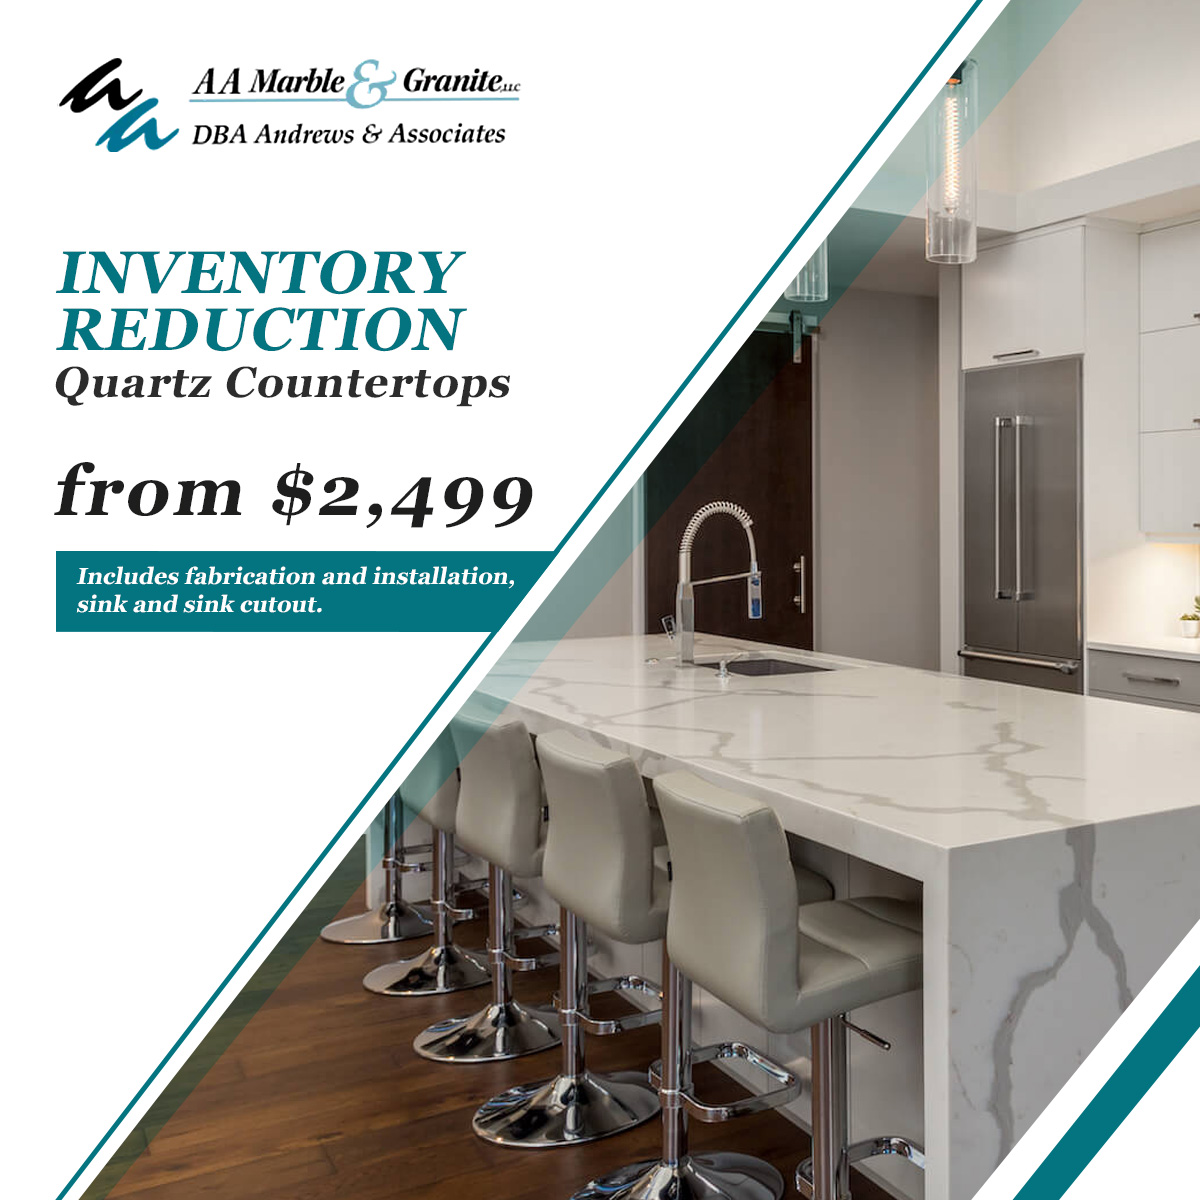 AA-Marble-Granite-Countertops-Inventory-Reduction-Sale